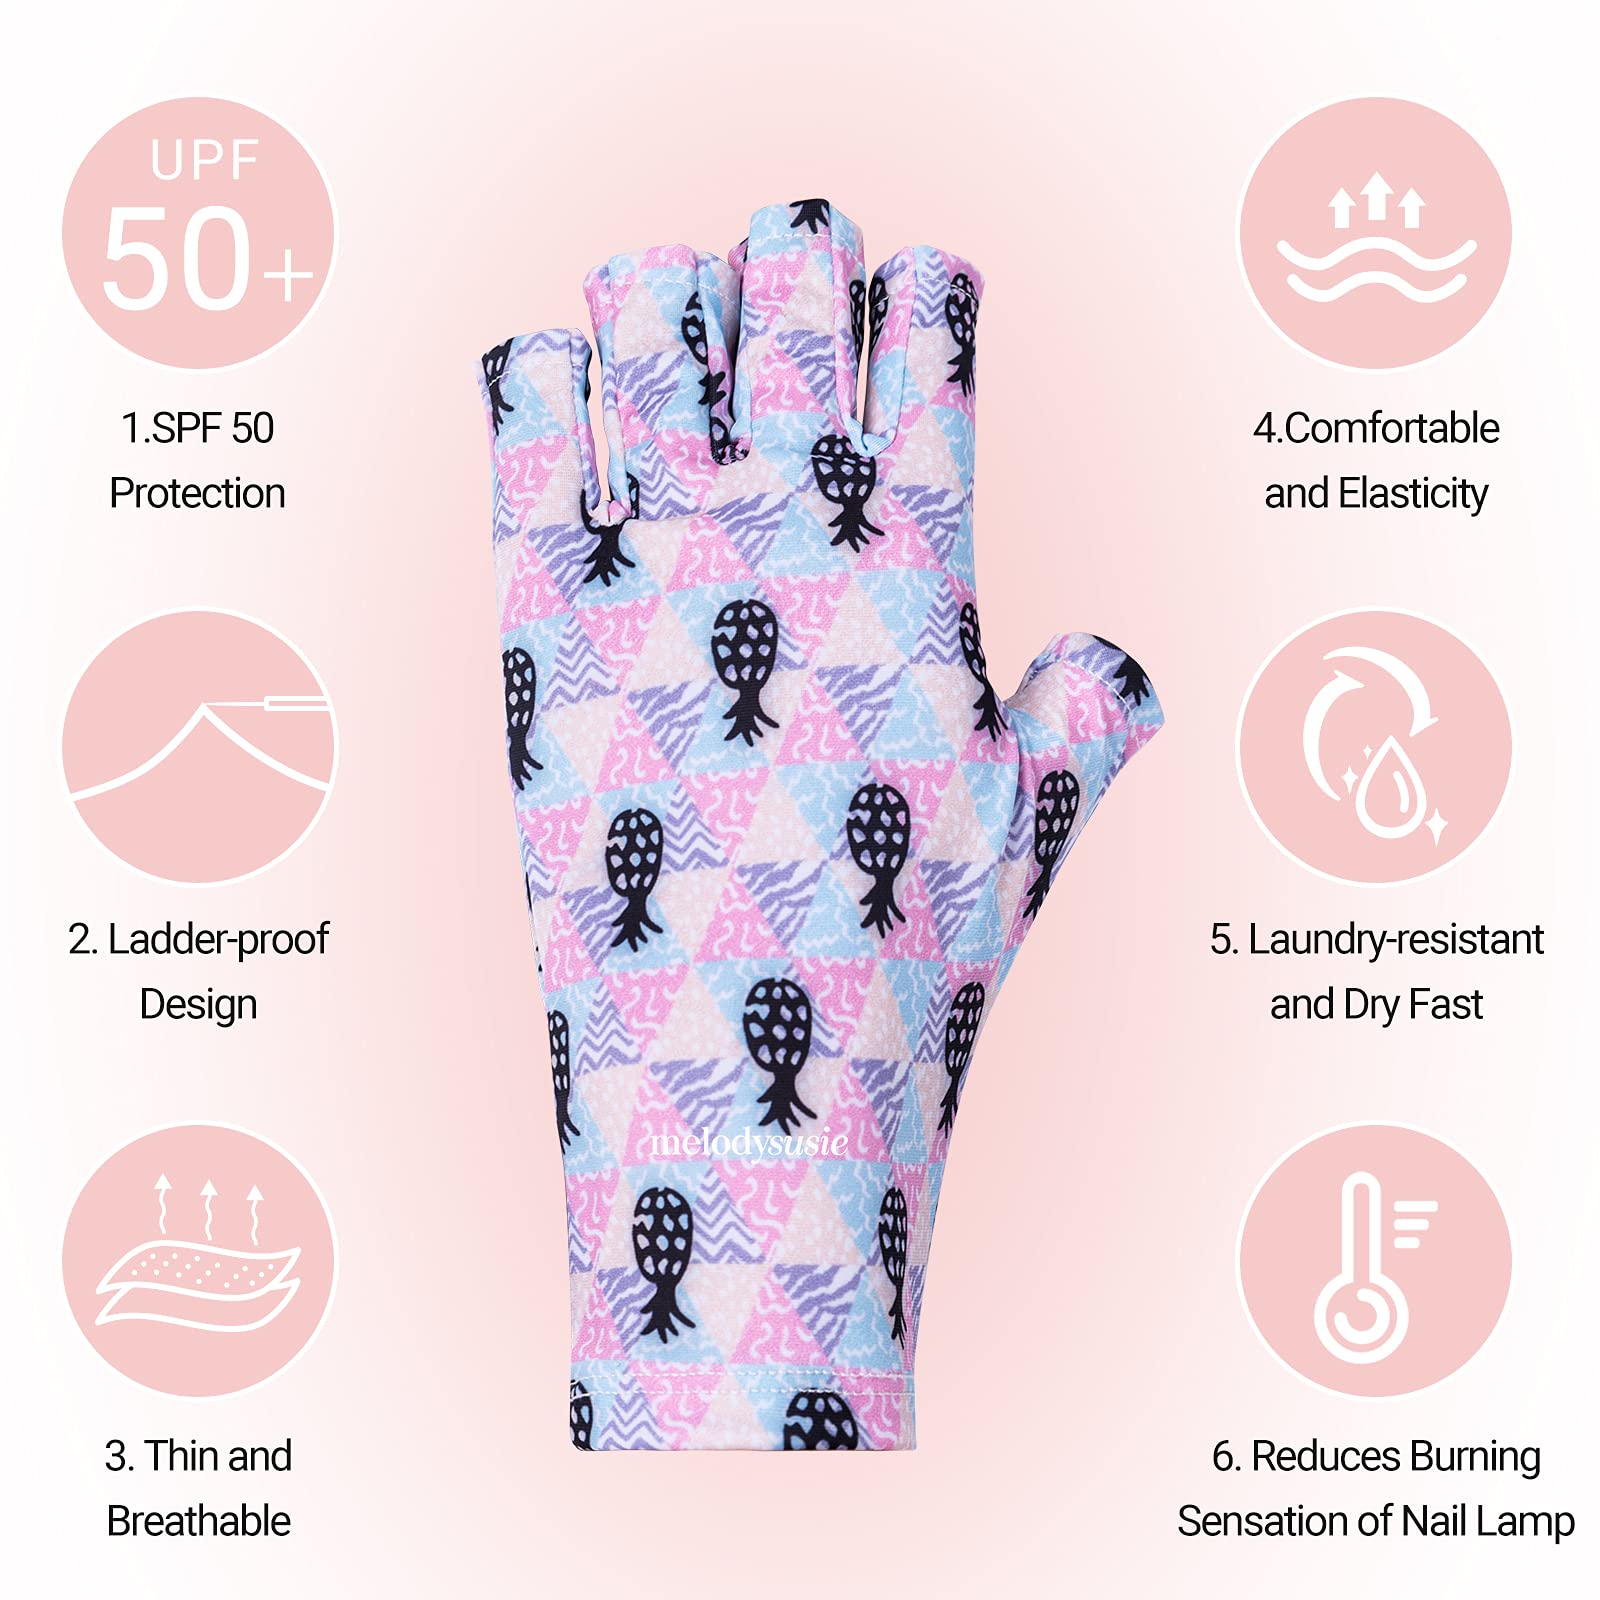 UV Shield Lycra Gloves for Manicure at Home or Salon, Pineapple